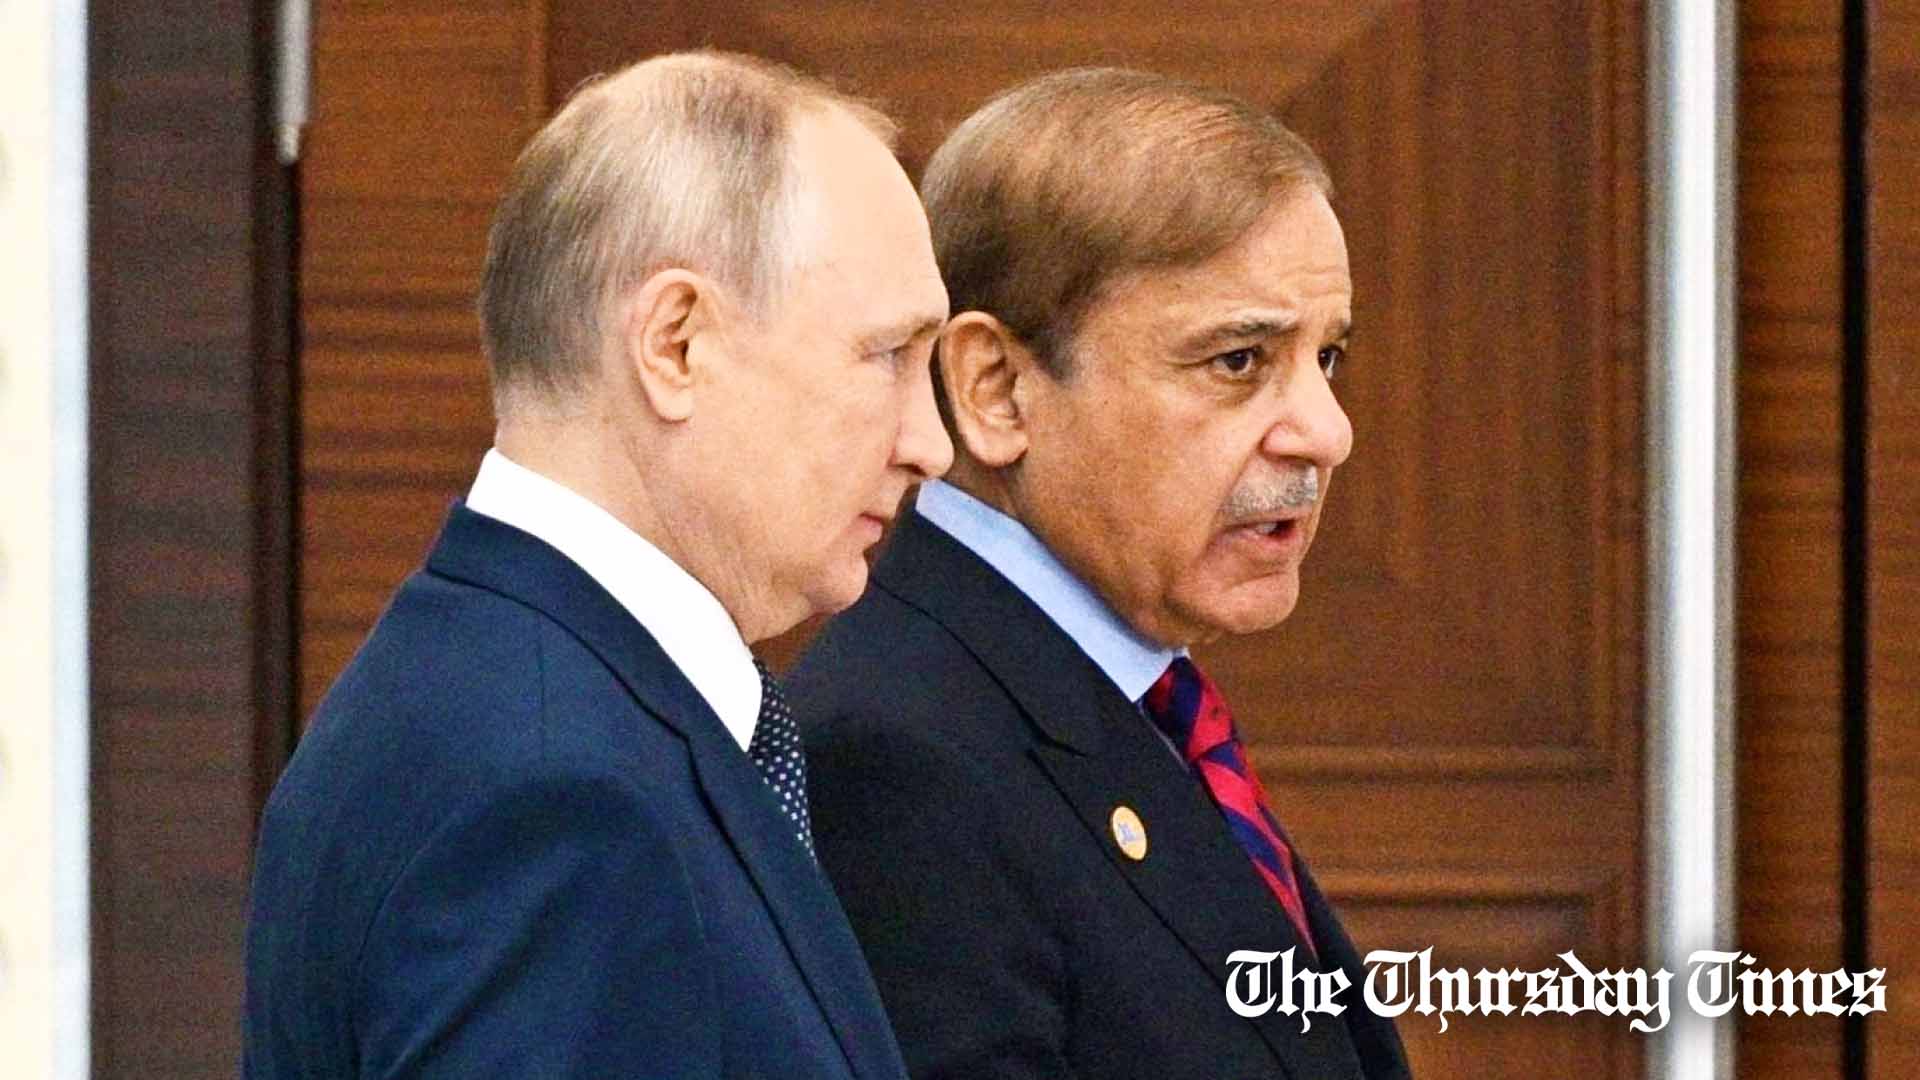 A file photo is shown of Russian premier Vladimir Putin (L) and Pakistani prime minister Shehbaz Sharif (R) at Astana in October 2022. — FILE/KREMLIN